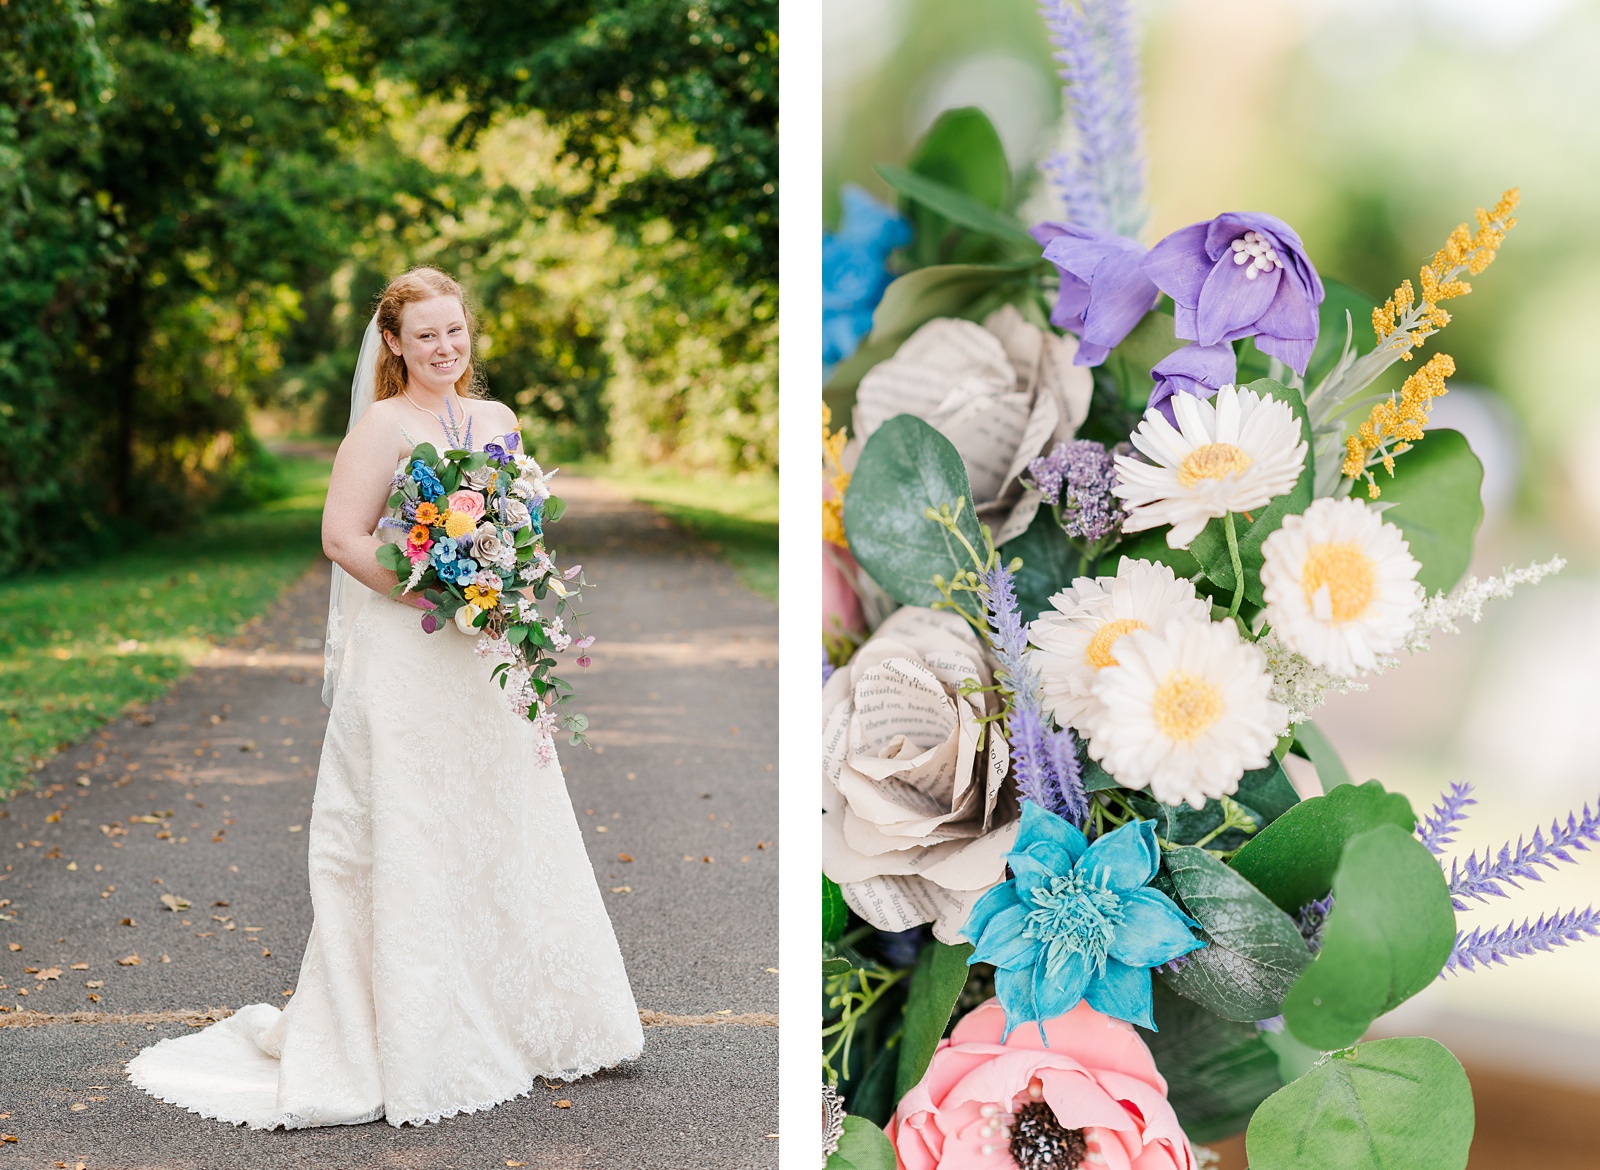 Bridal Details and Portraits During Fall Fairytale Inspire Intimate Ceremony at Osbourne Park in Richmond. Photography by Richmond Wedding Photographer Kailey Brianne Photography. 